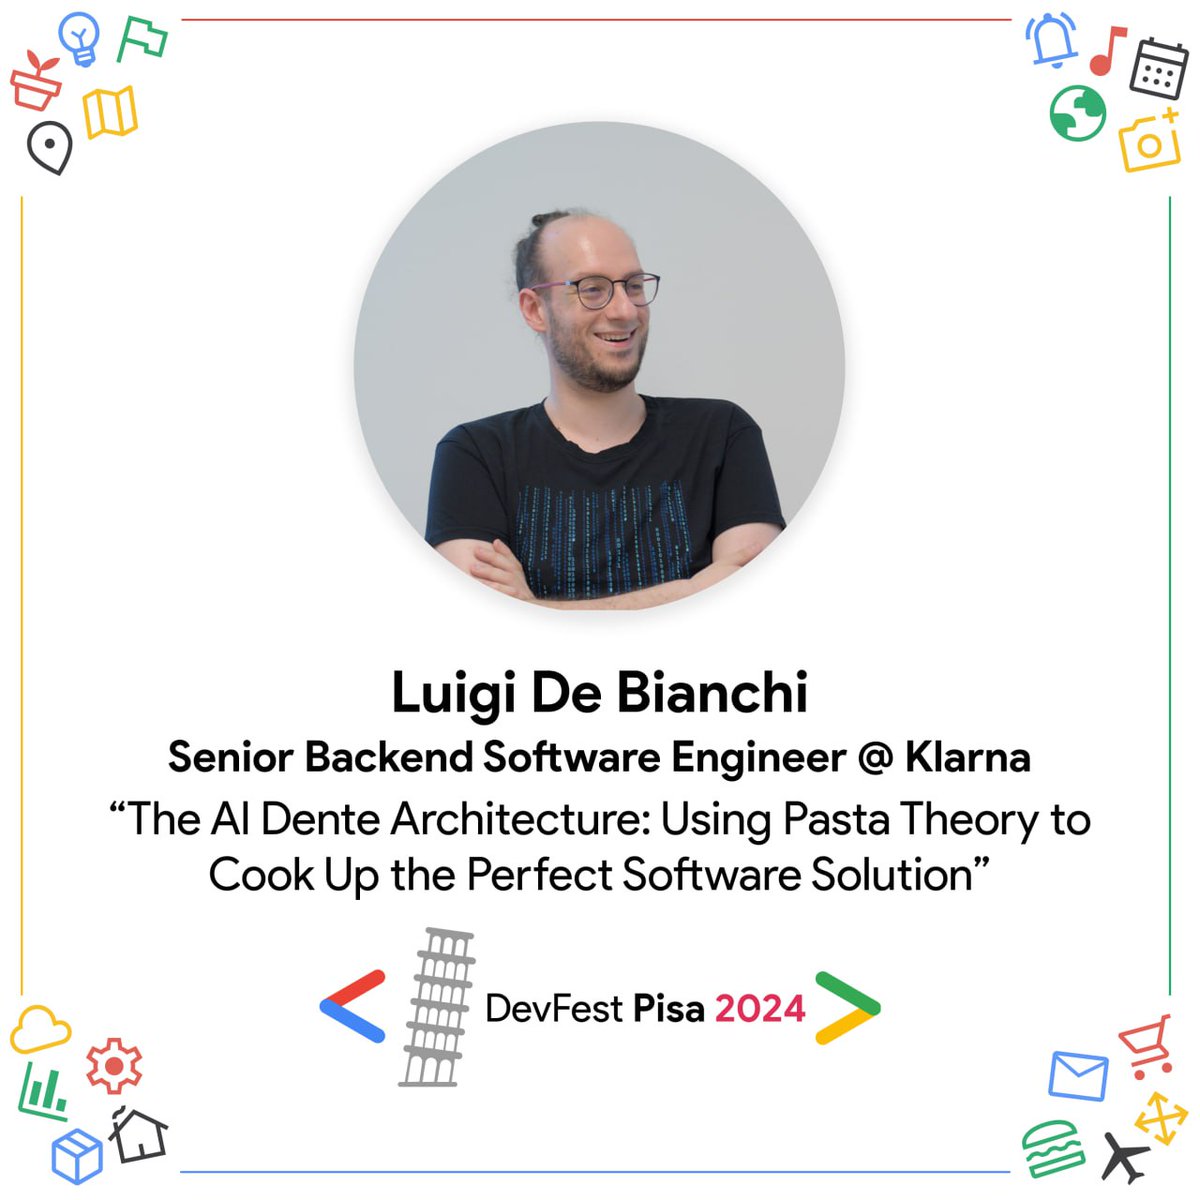 Heyla developers! 🚀
We are thrilled to introduce Luigi De Bianchi as a speaker at DevFest Pisa 2024! 😍

If you haven’t gotten your ticket yet, hurry up! We are waiting for you. 🥰

Get your tickets for free: buff.ly/2thmu4F 🎟
#devfestpisa2024 #pisa #gdgpisa #wtmpisa